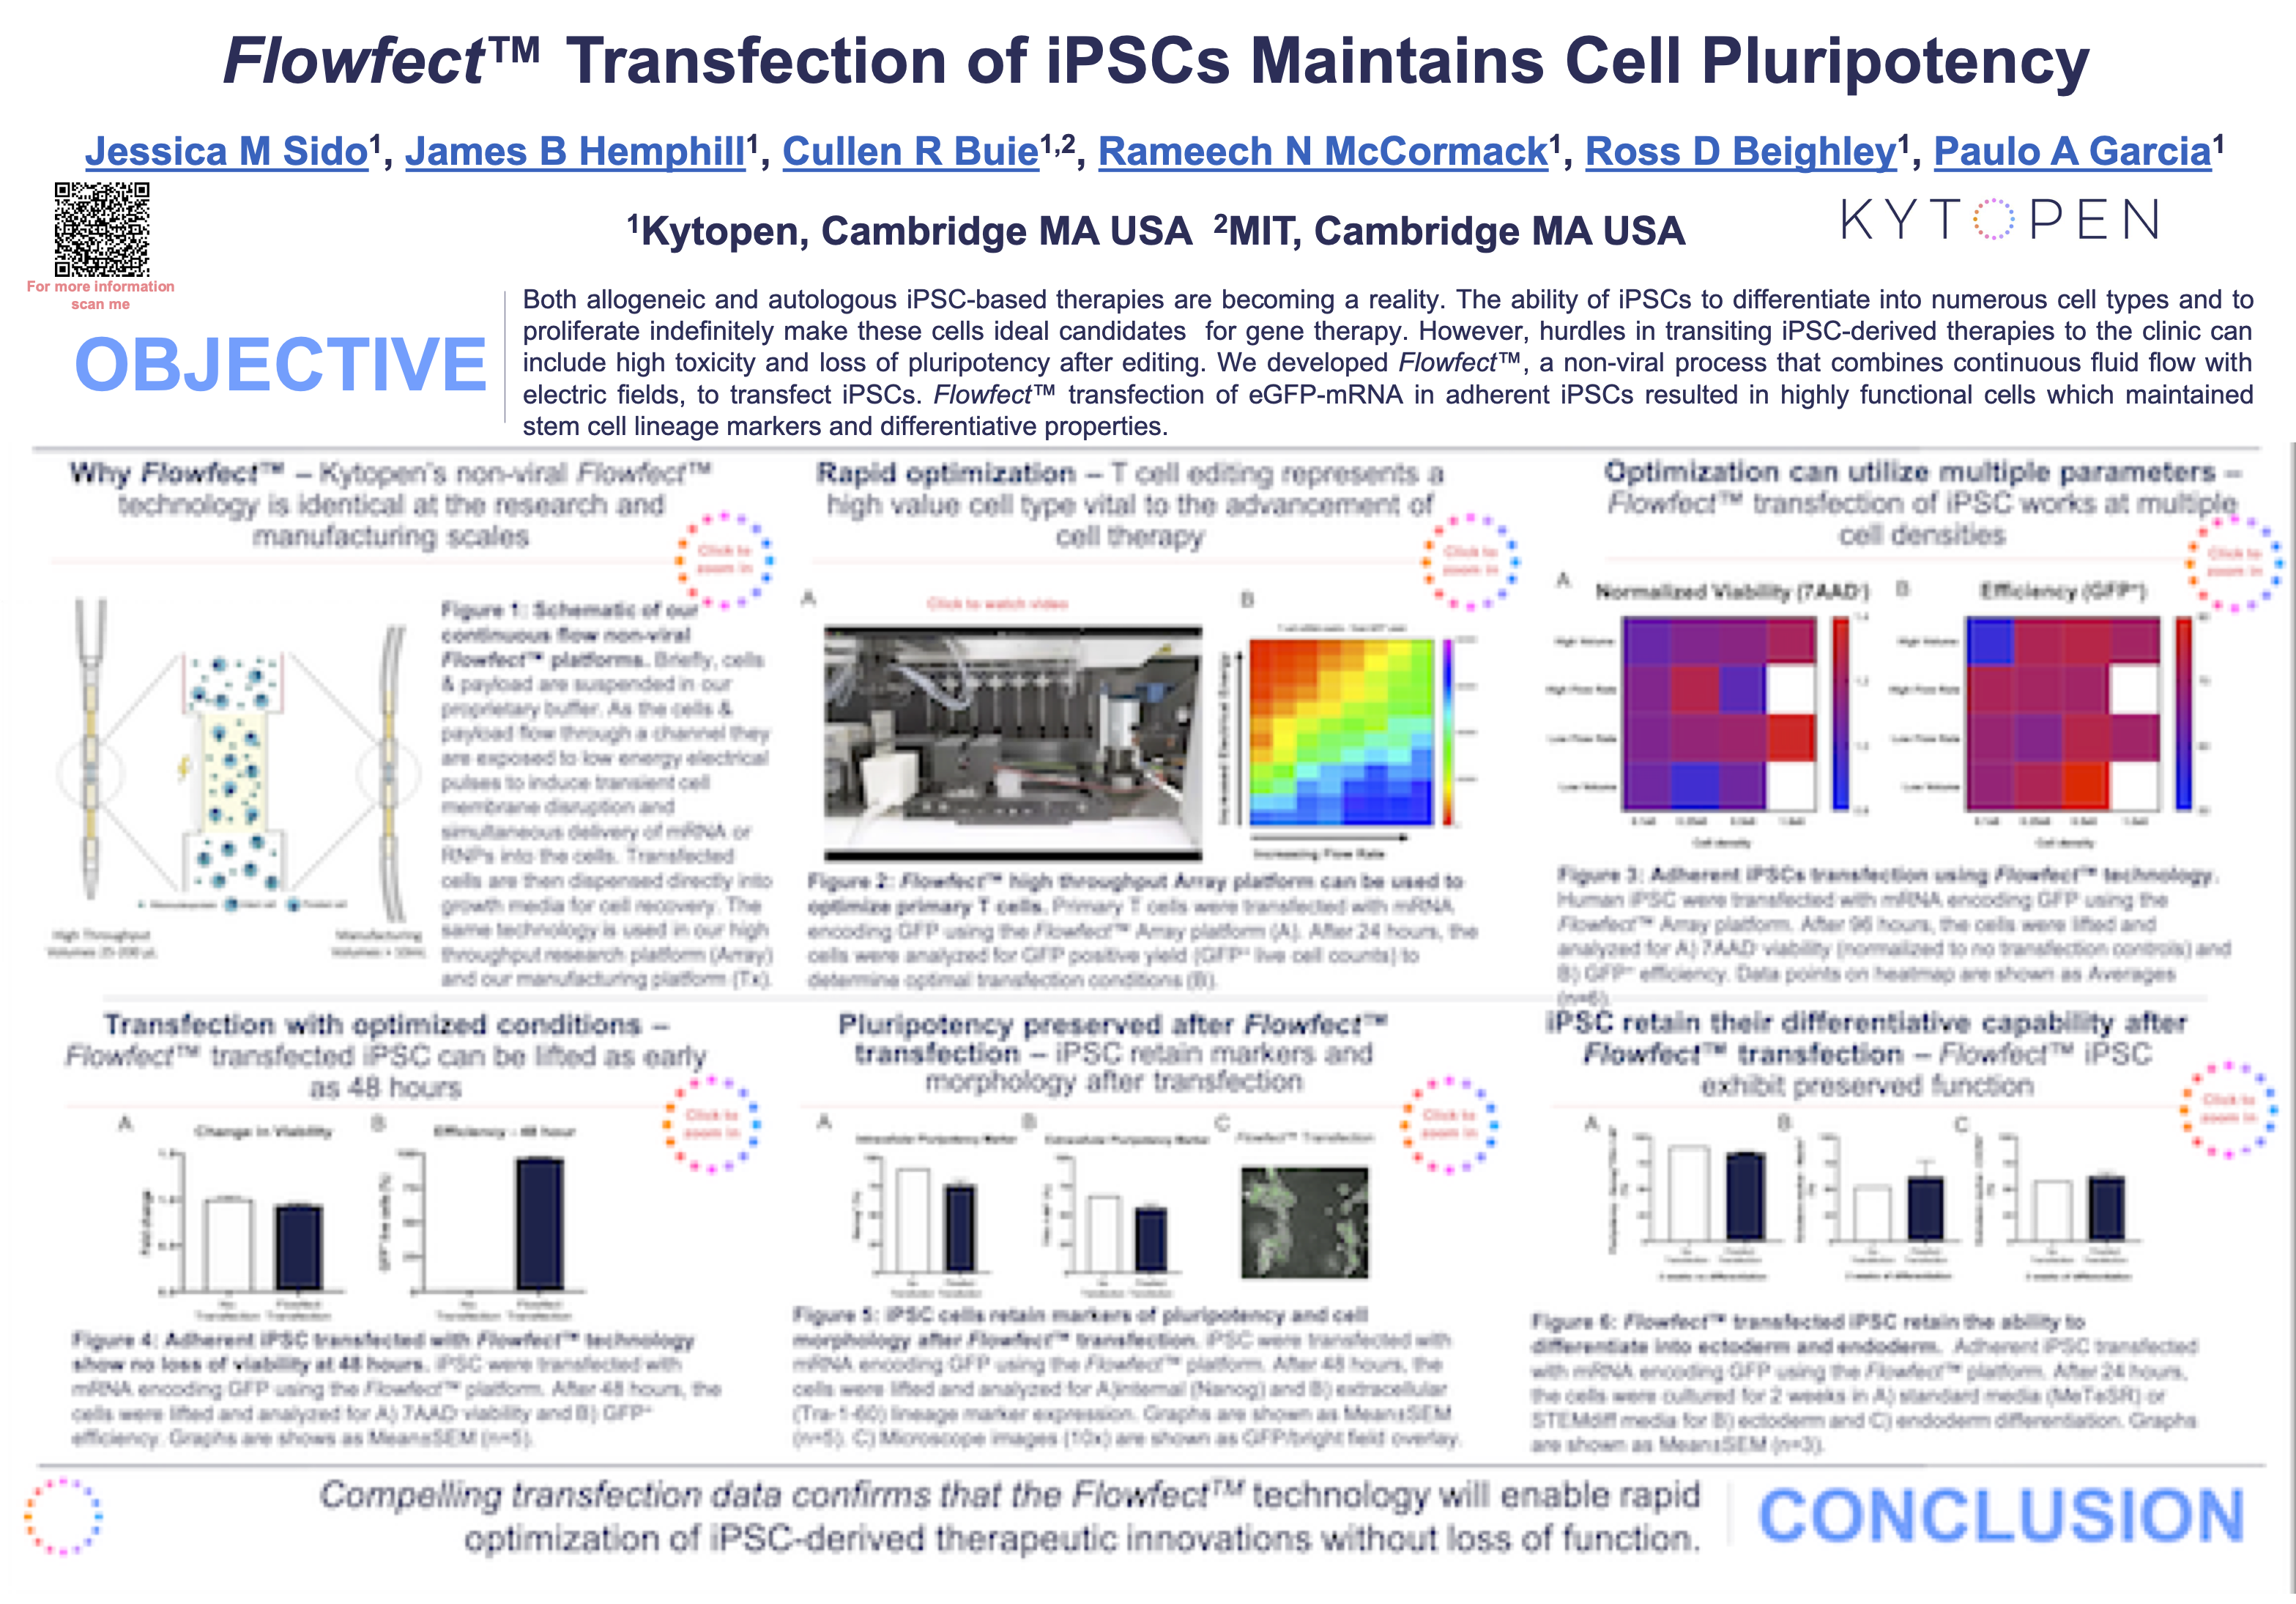 Kytopen-Poster-ISSCR_Flowfect™-Transfection-of-iPSCs-Maintains-Cell-Pluripotency-FINAL-1